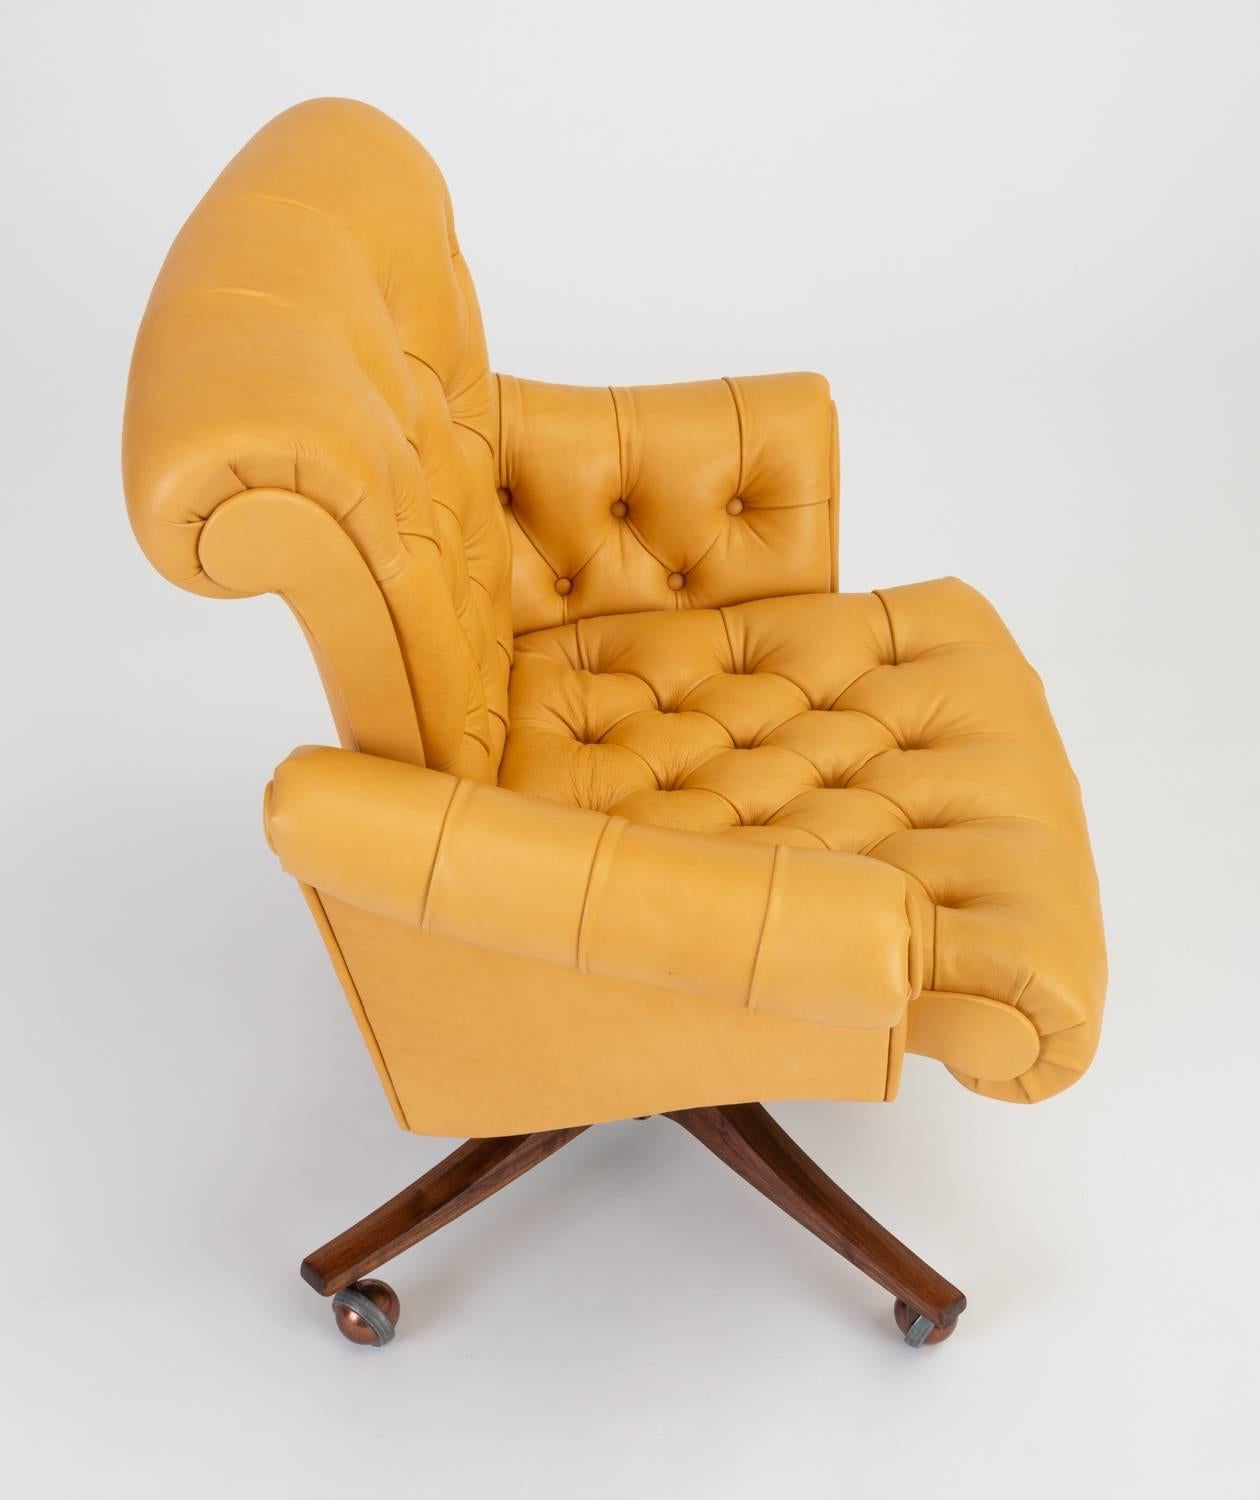 Mid-20th Century Model 932 “In Clover” Executive Office Chair by Edward Wormley for Dunbar